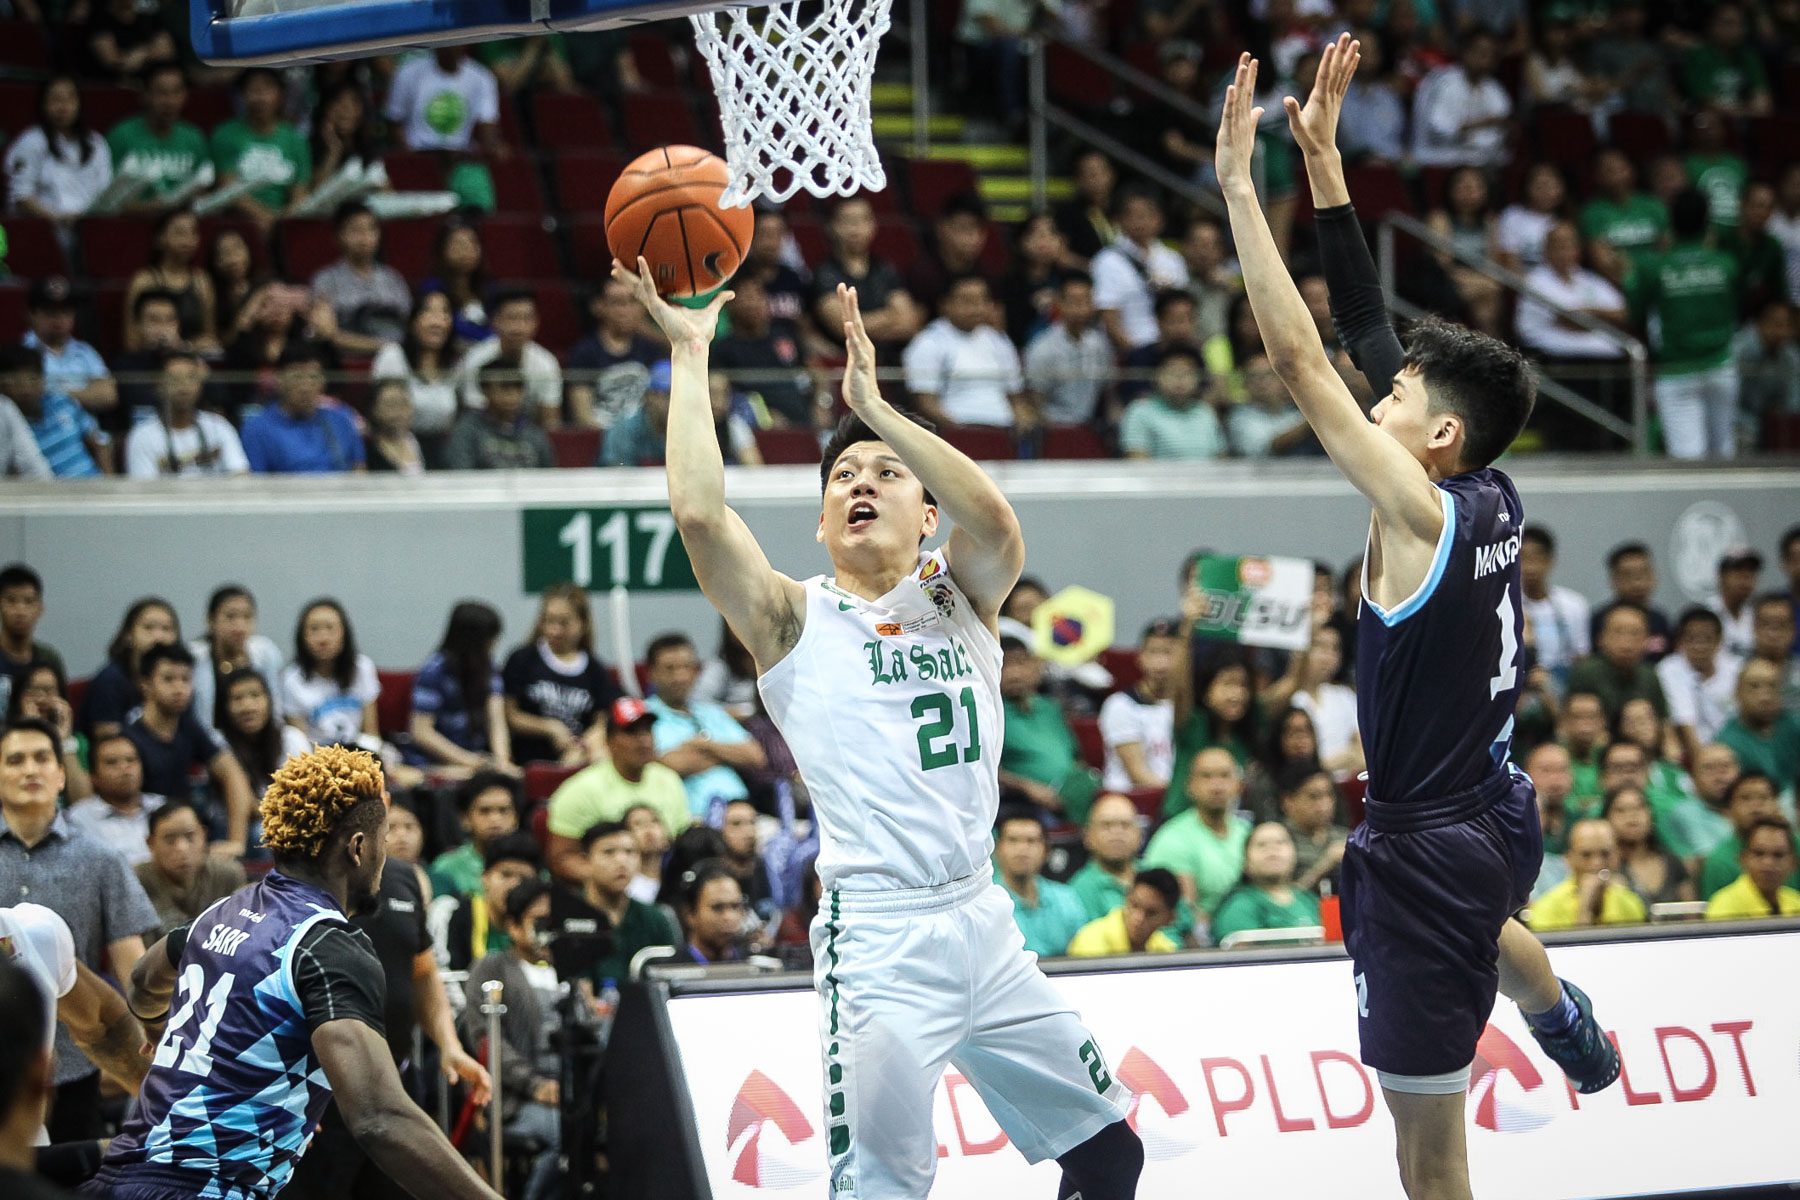 La Salle flirting with an epic collapse